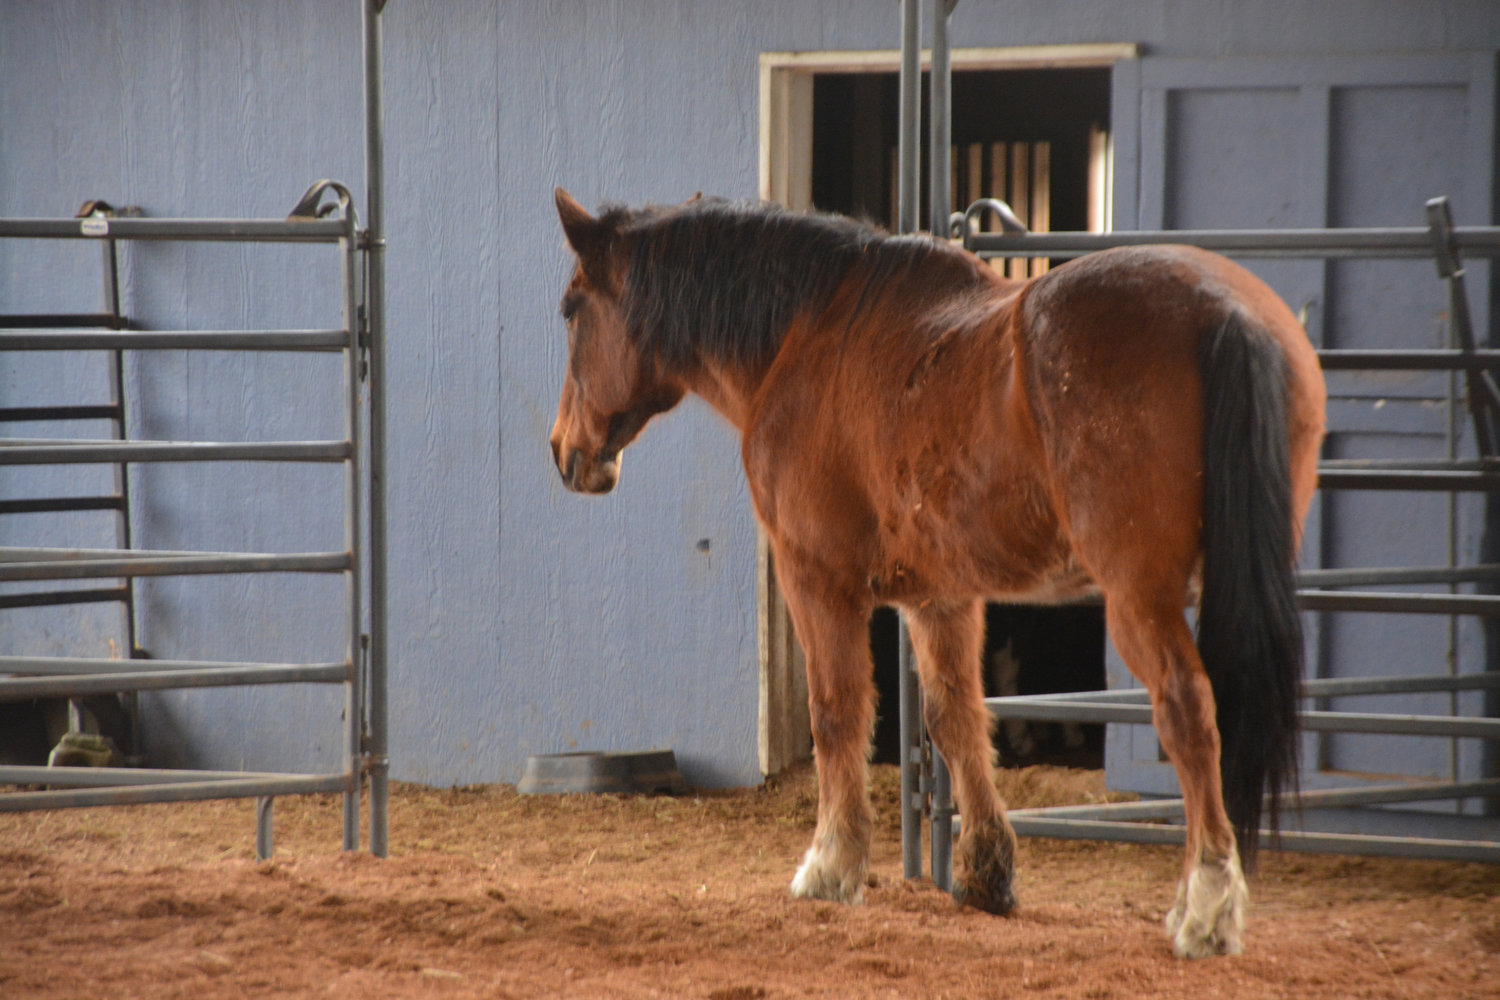 Remington is one of several horses at Hope for Heroes.